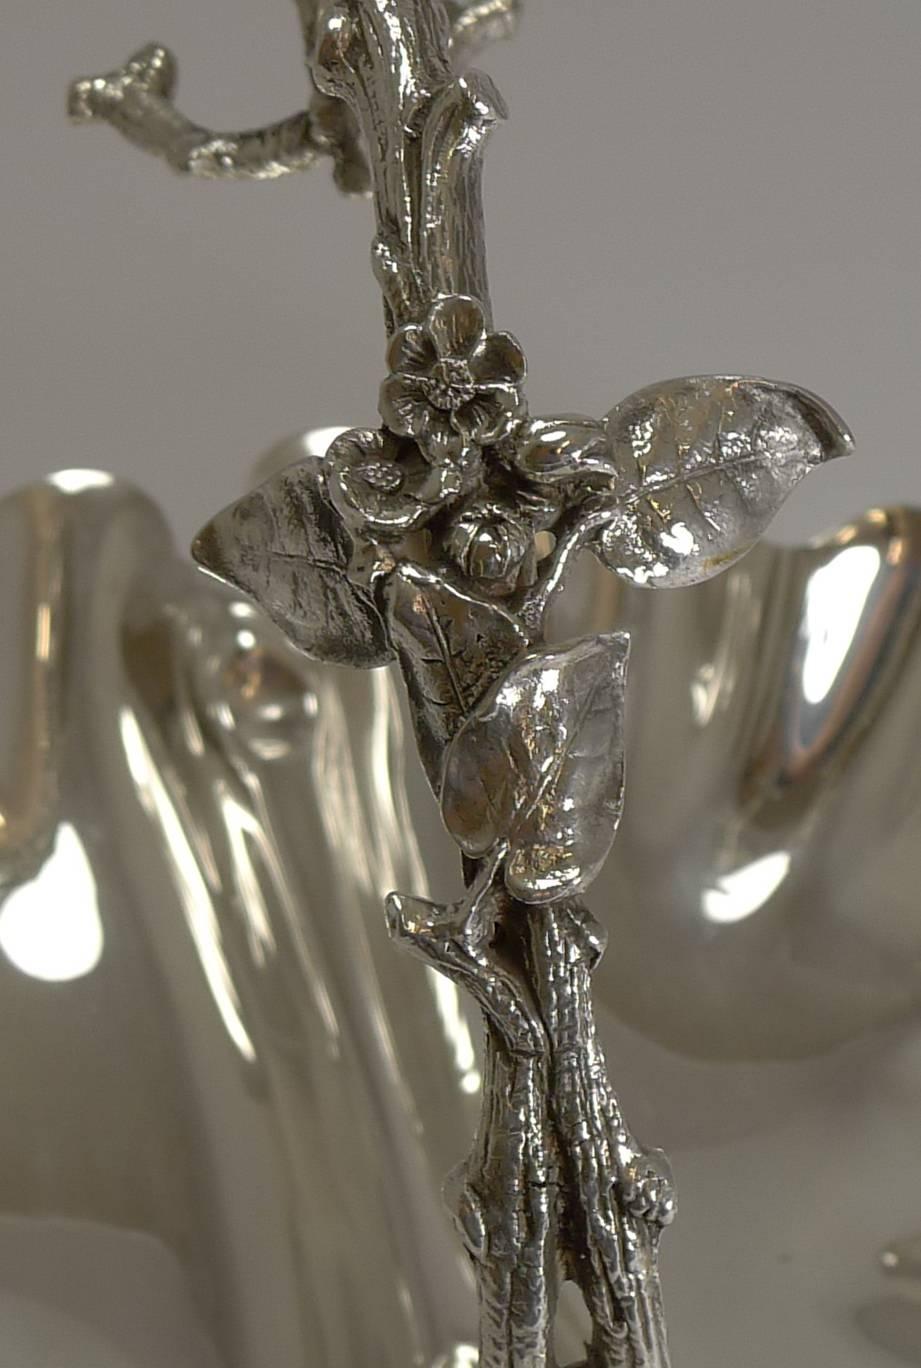 Plated Antique English Silver Plate Grape Stand, circa 1900